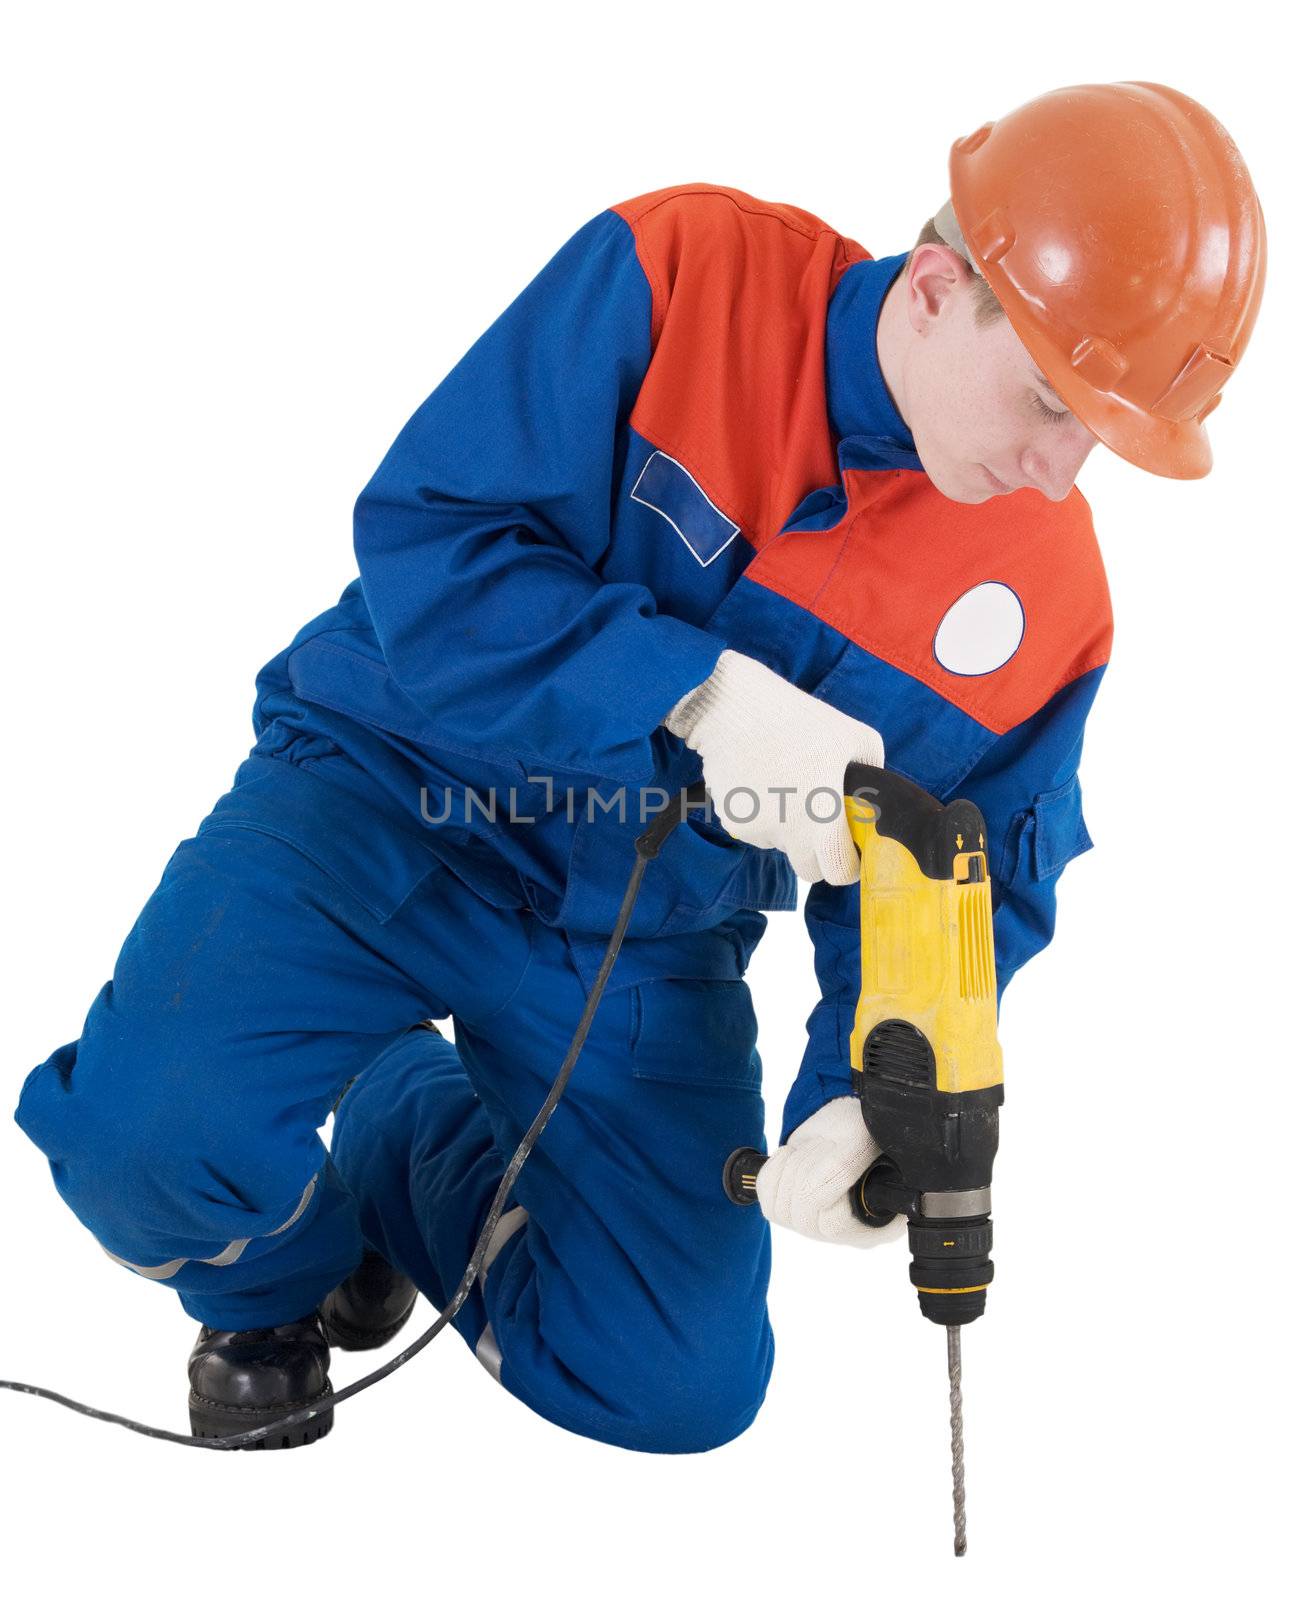 Labourer with hand drill  by pzaxe